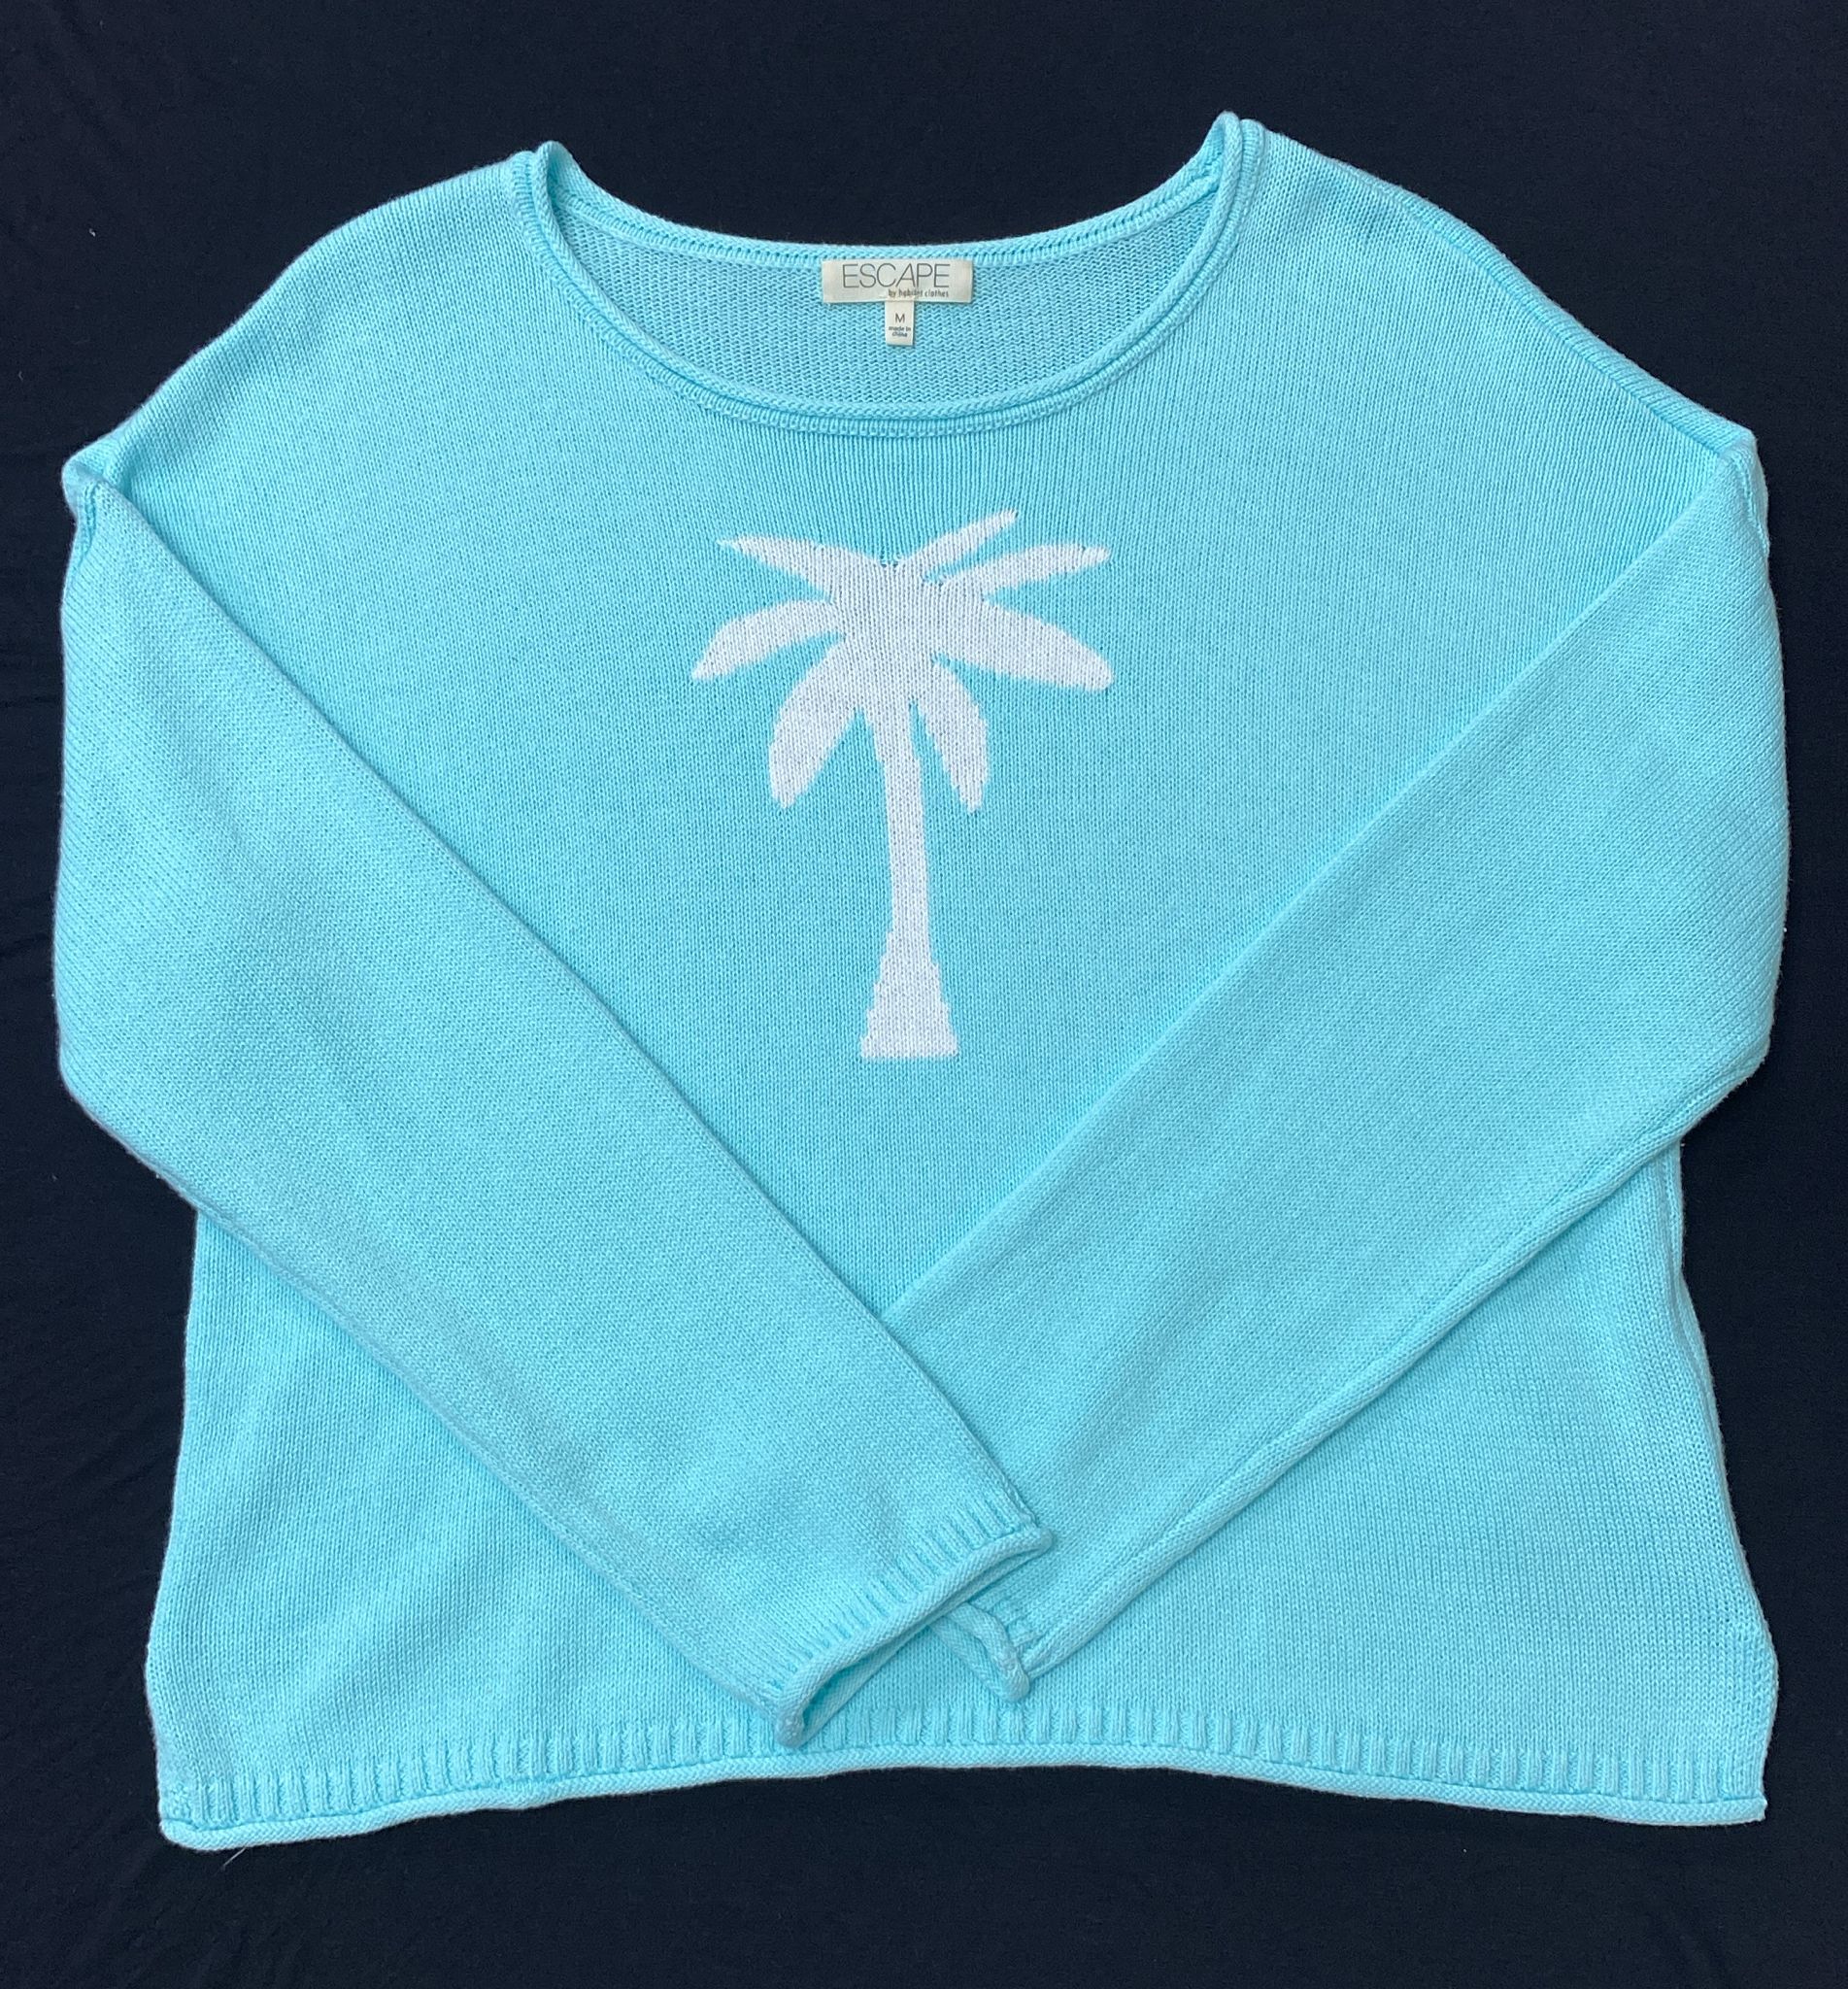 BEACH SWTRS PALM PULLOVER